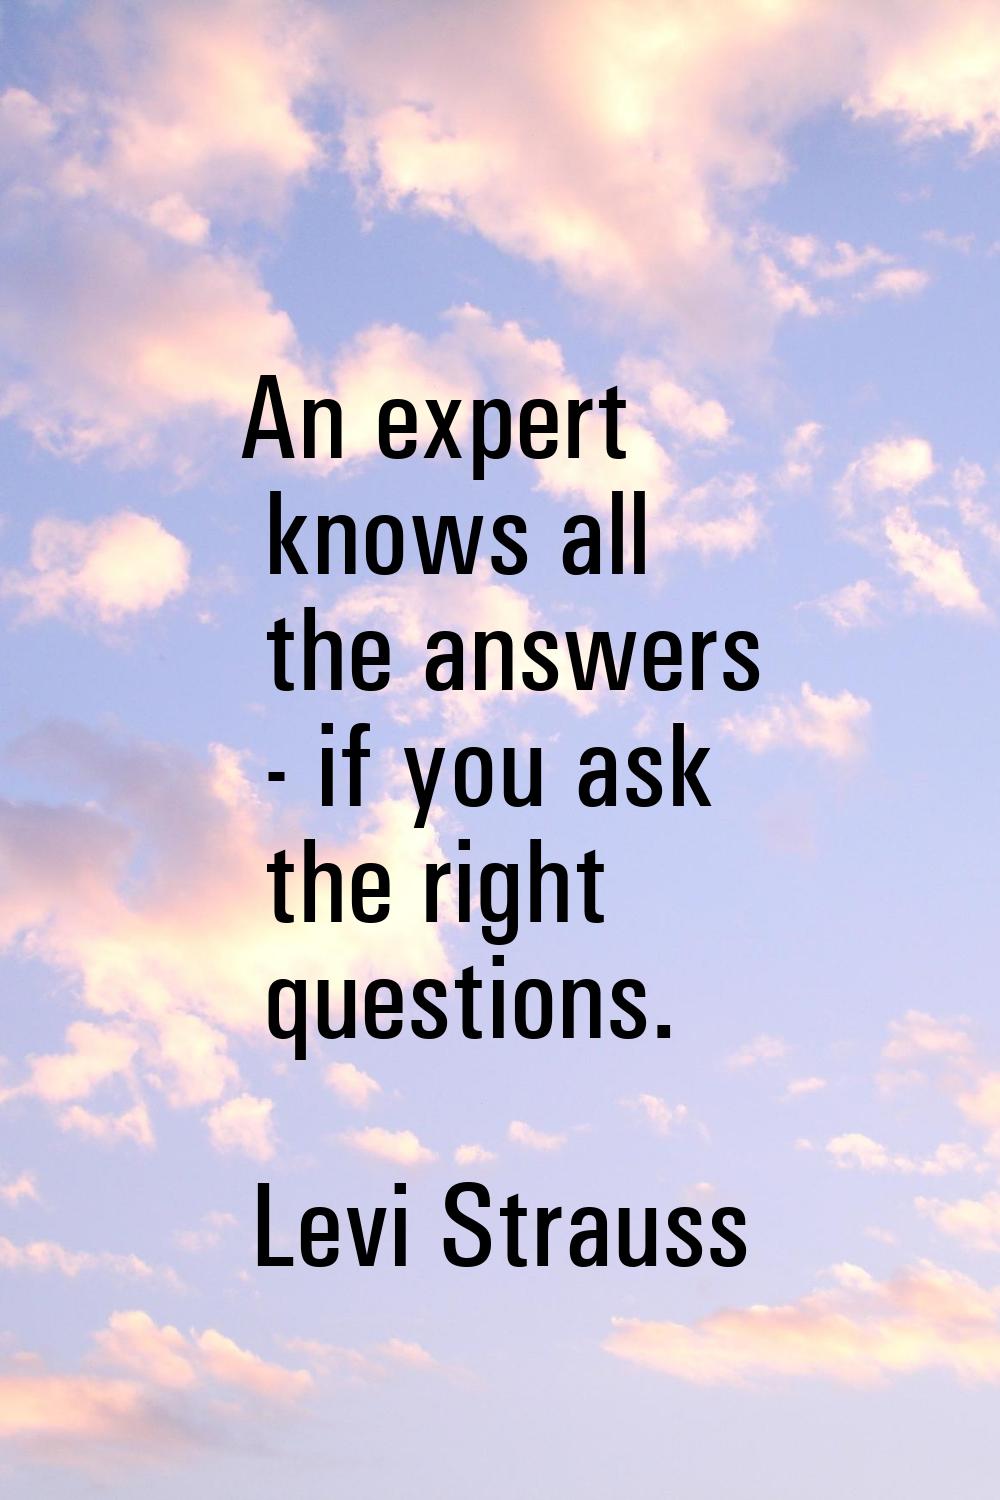 An expert knows all the answers - if you ask the right questions.